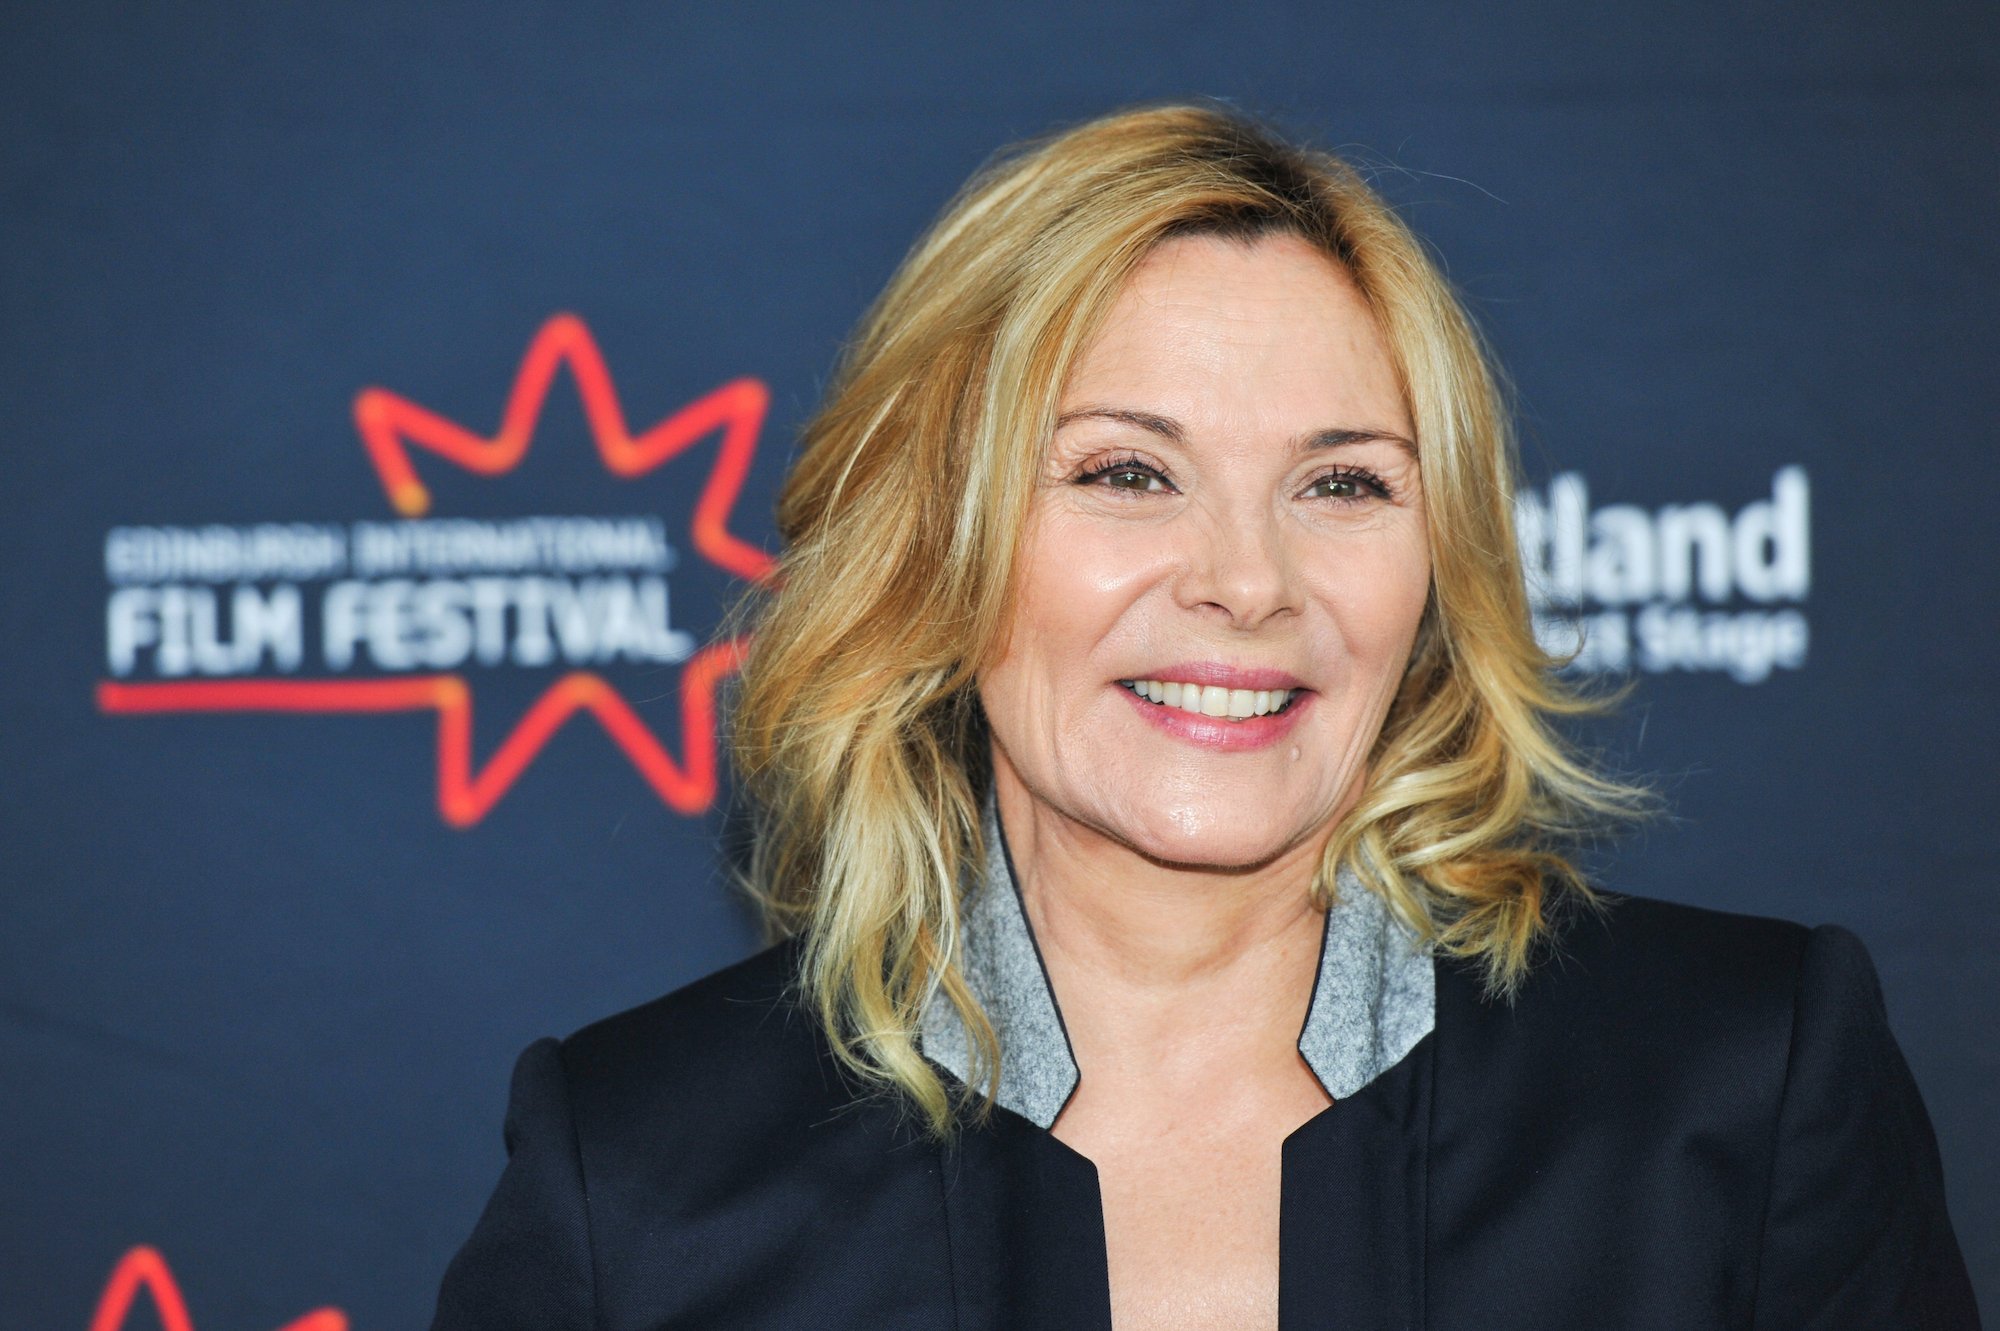 Does Kim Cattrall Have a British Accent?